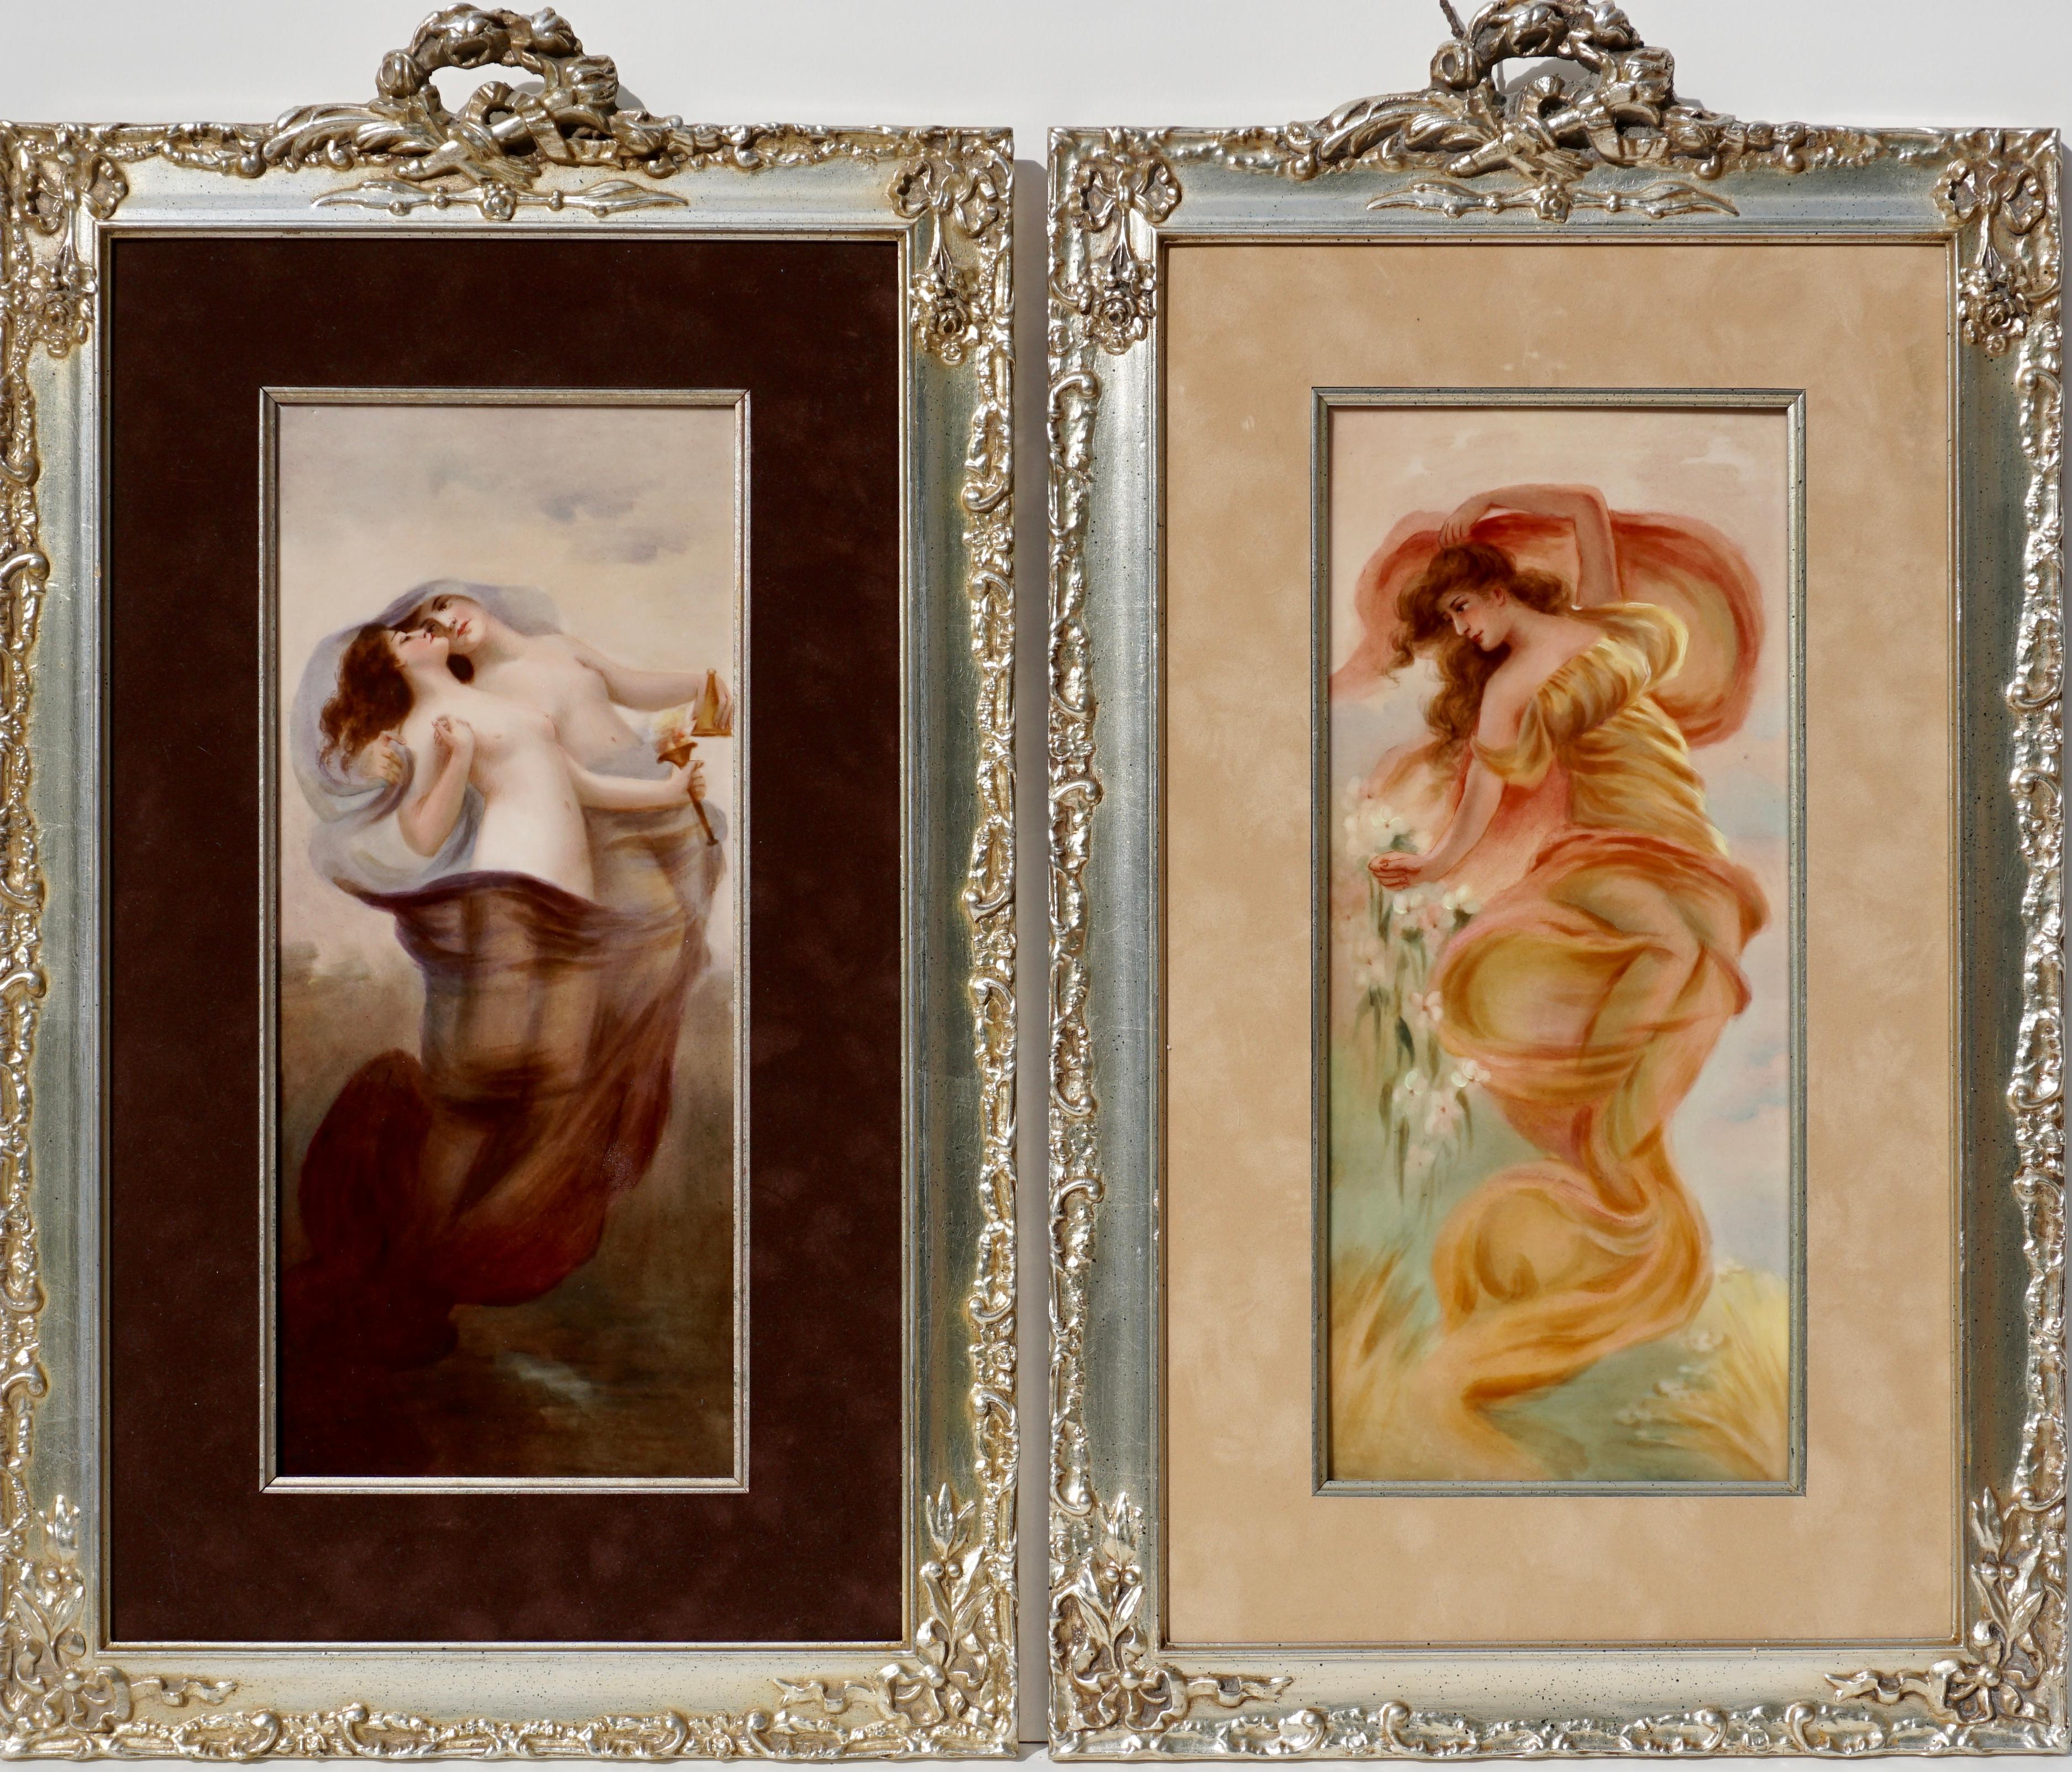 A wonderful pair of hand painted Limoges, circa 1900, porcelain paintings. These semi nude Art Nouveau ladies are floating like sublime nymphs in a dream. These would look amazing in an Art Deco decorated room! 

Marked on back 